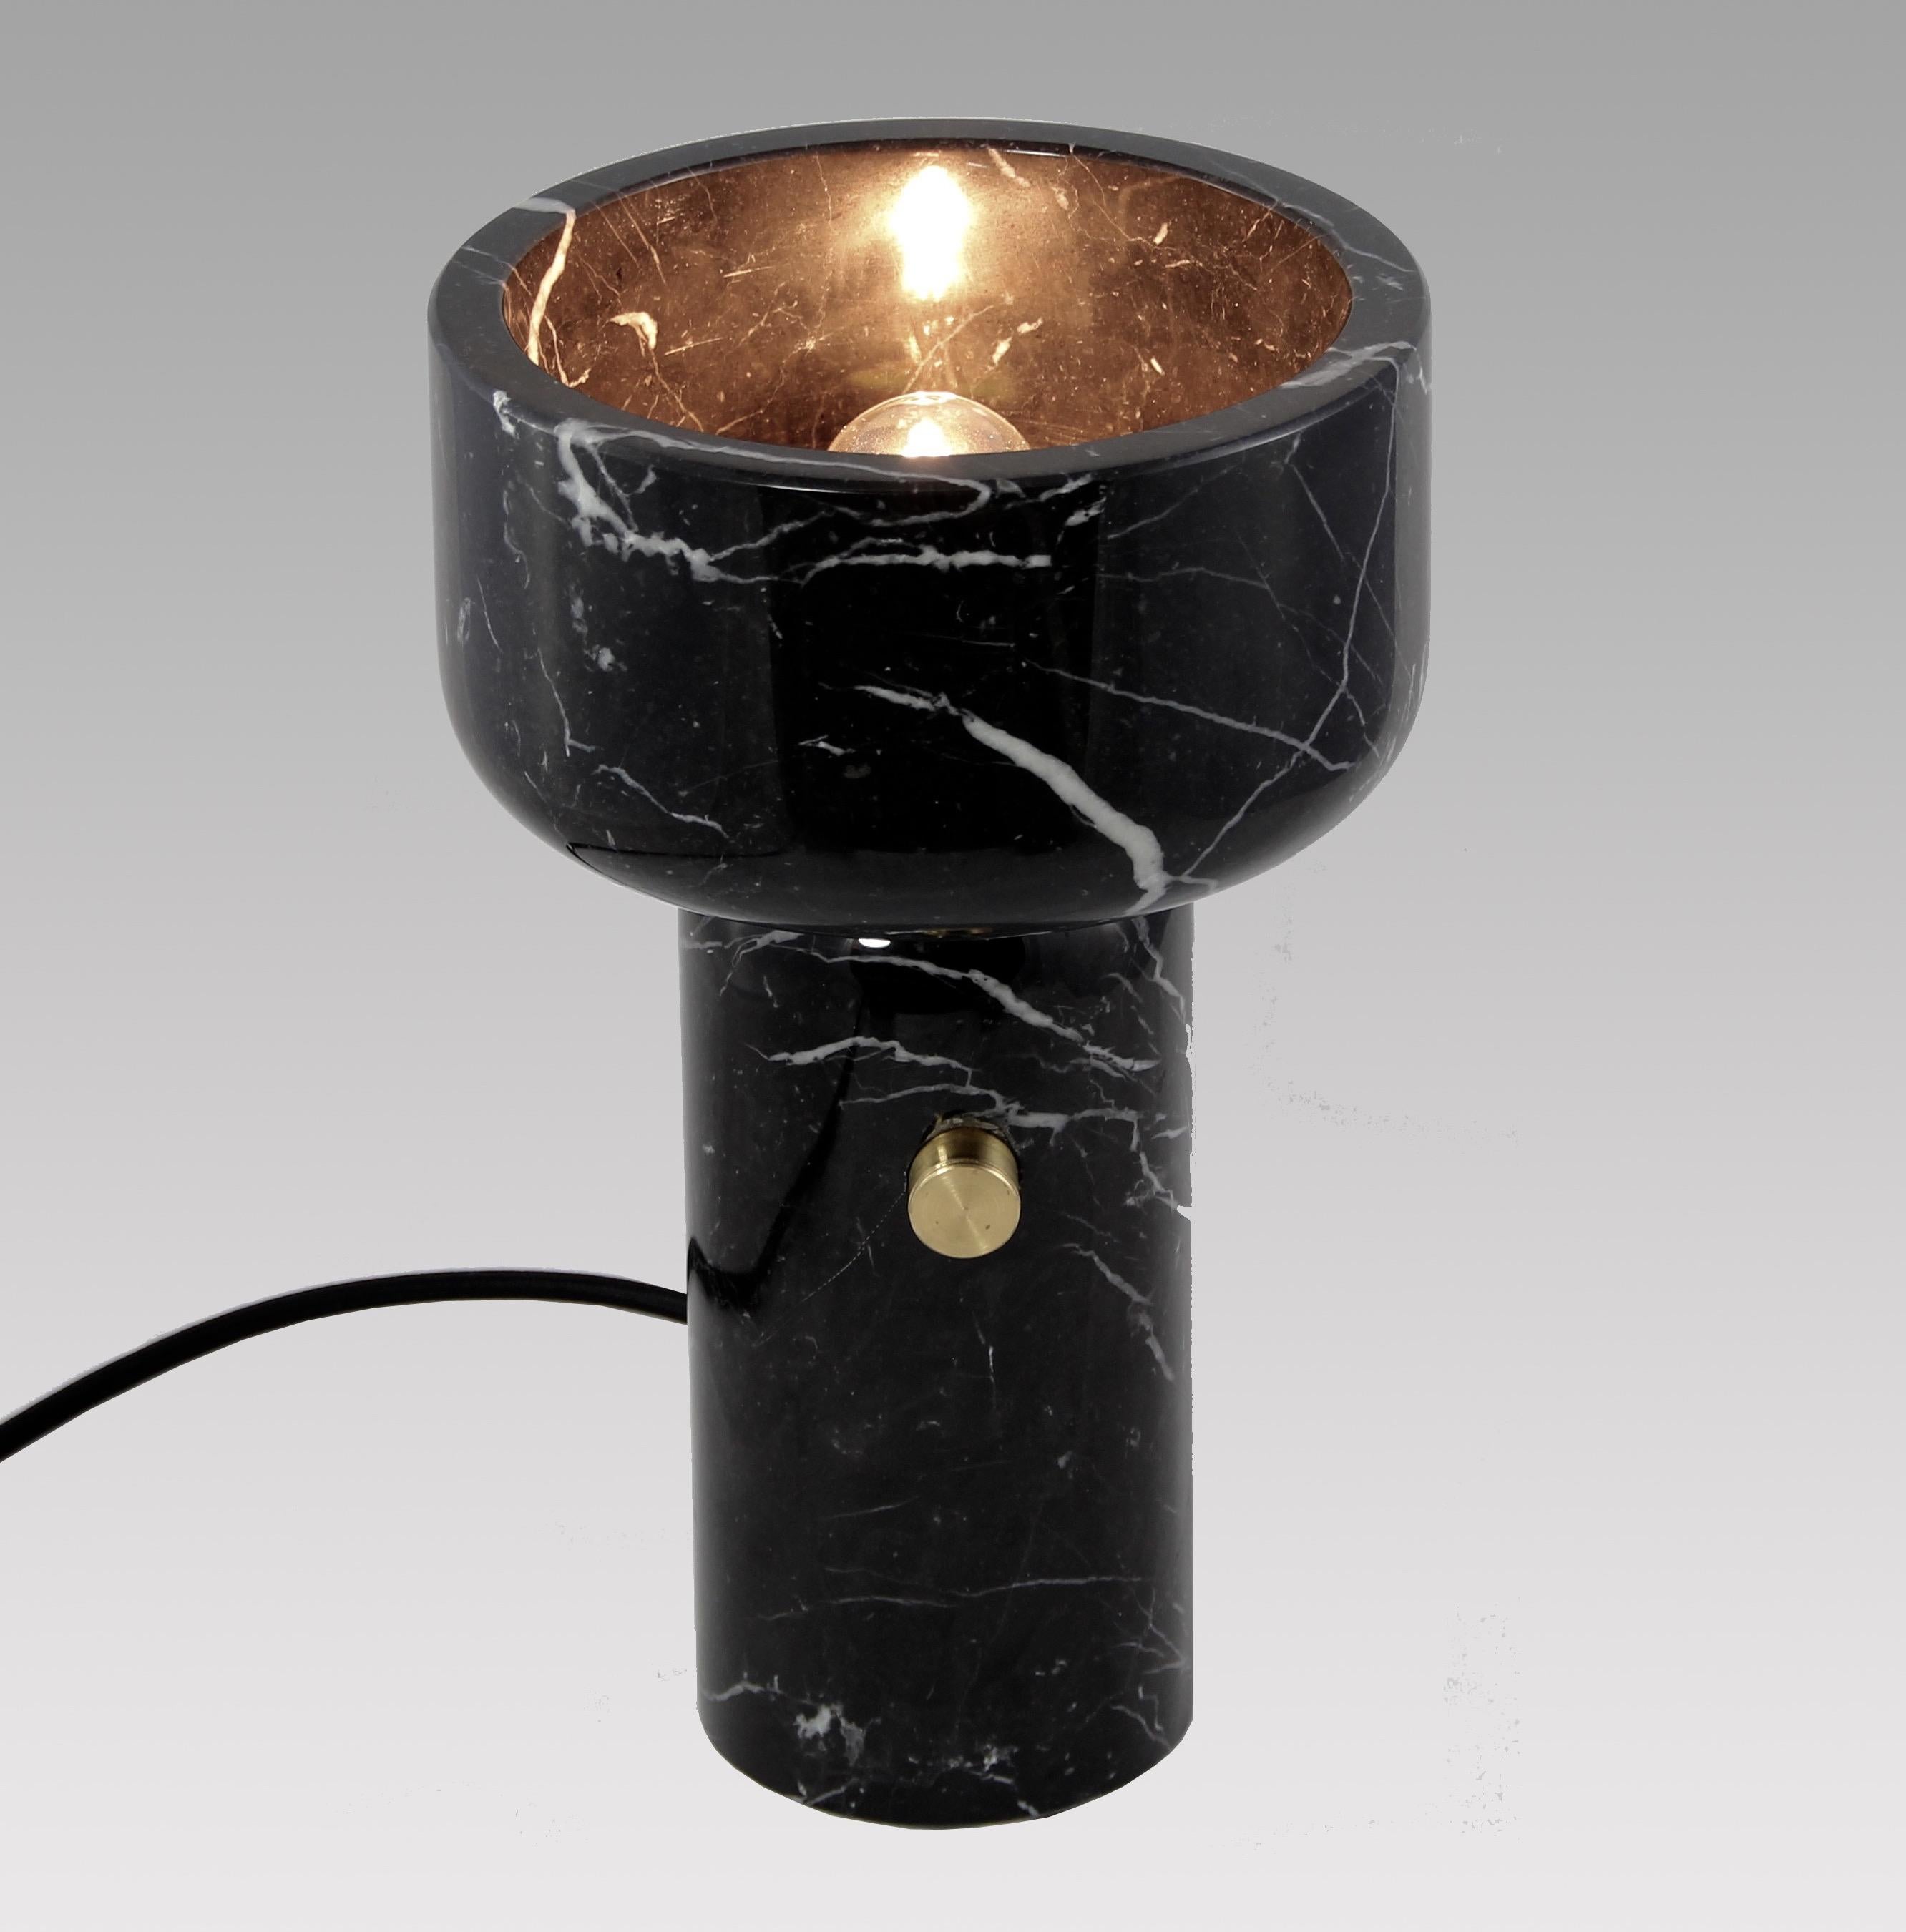 Cosulich Interiors in collaboration with Matlight: bespoke handcrafted sculpture grand cup table lamp, part of the Italian modern collection called Andromeda, designed by Ekaterina Elizarova for Matlight Milano. The bold daring design using two